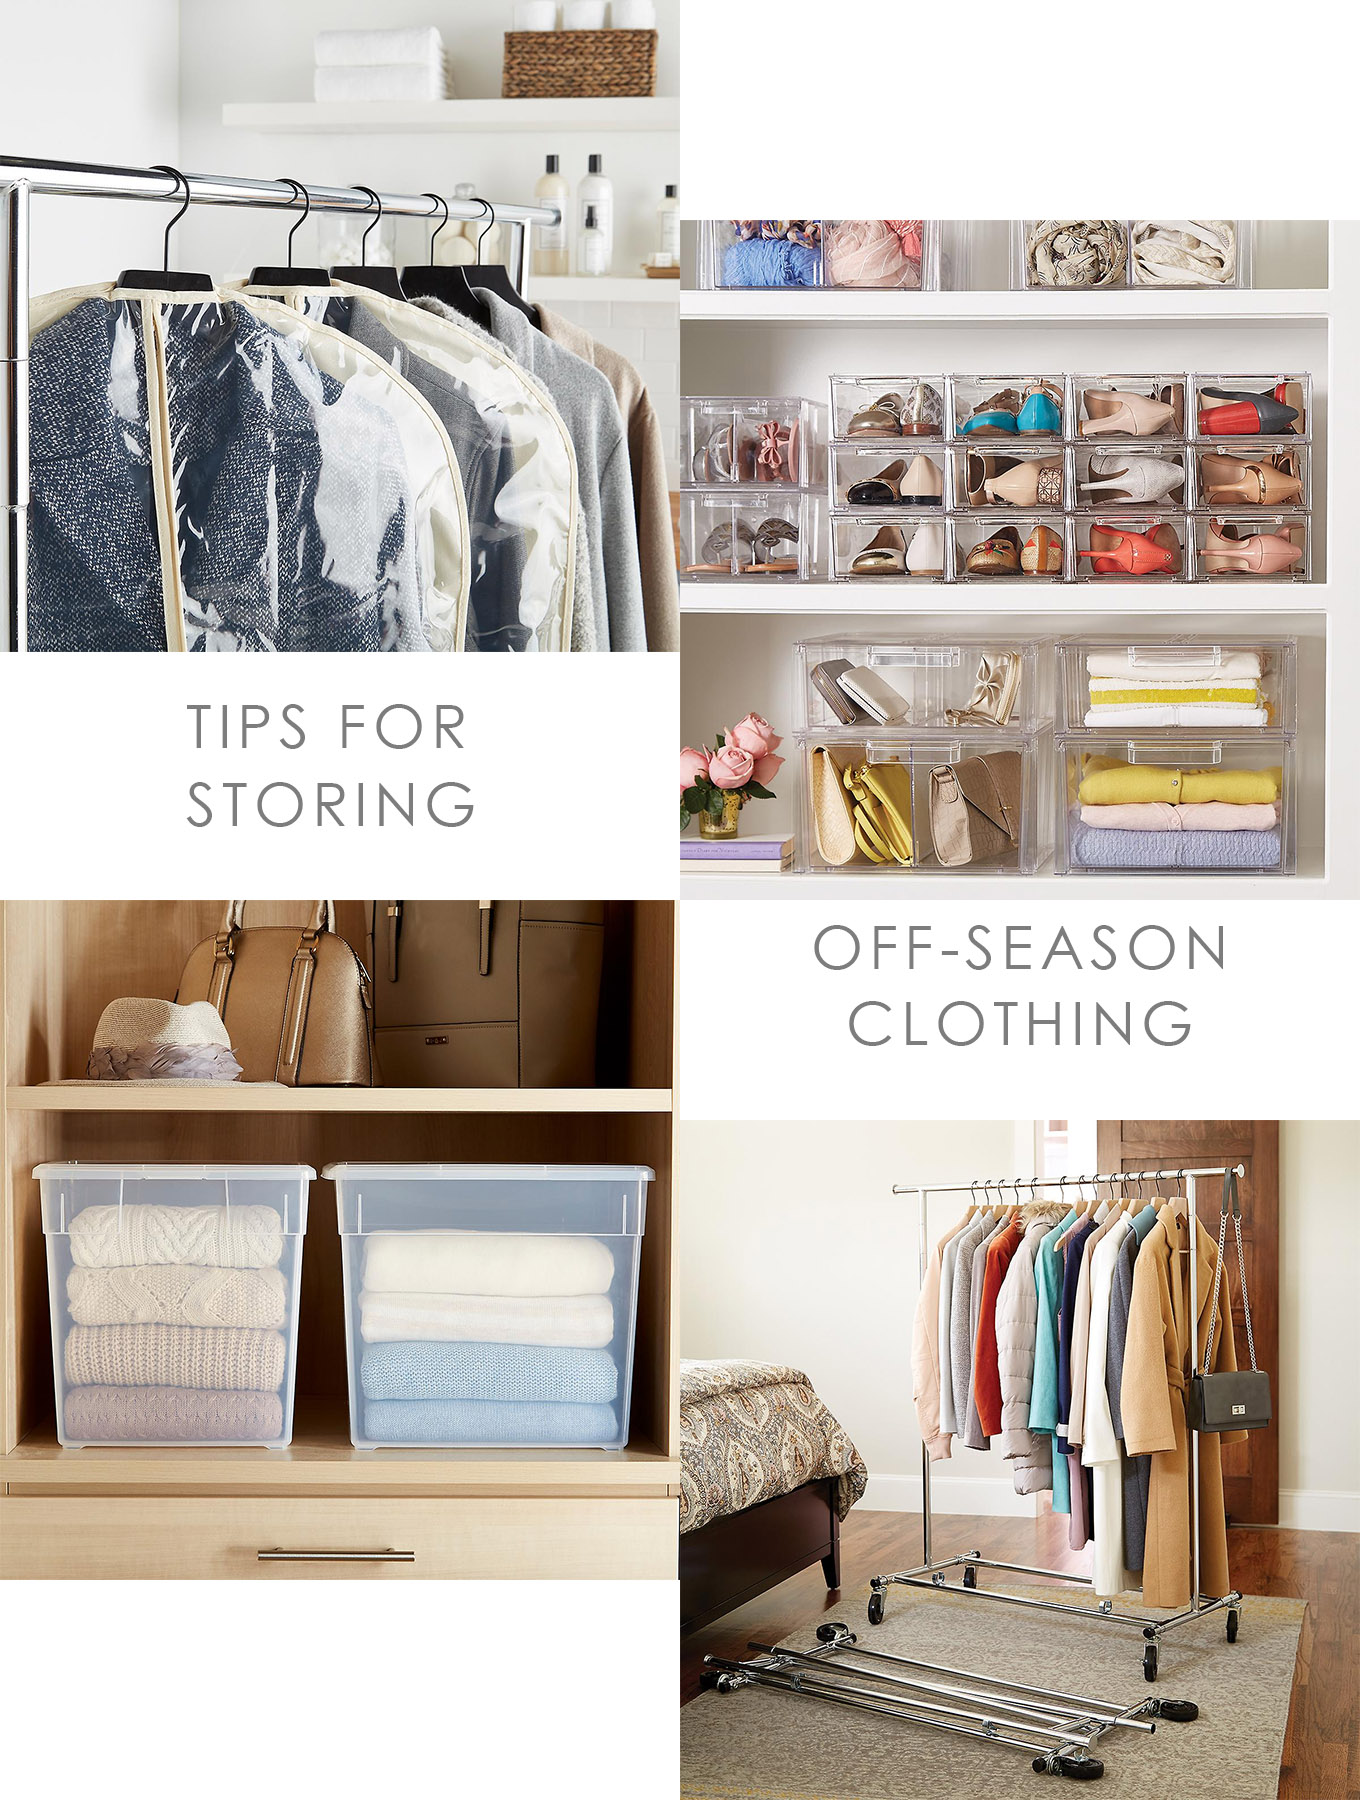 Are you ready to change over your closet for a new season? Follow these tips for storing off season clothes and you will have an organized closet!